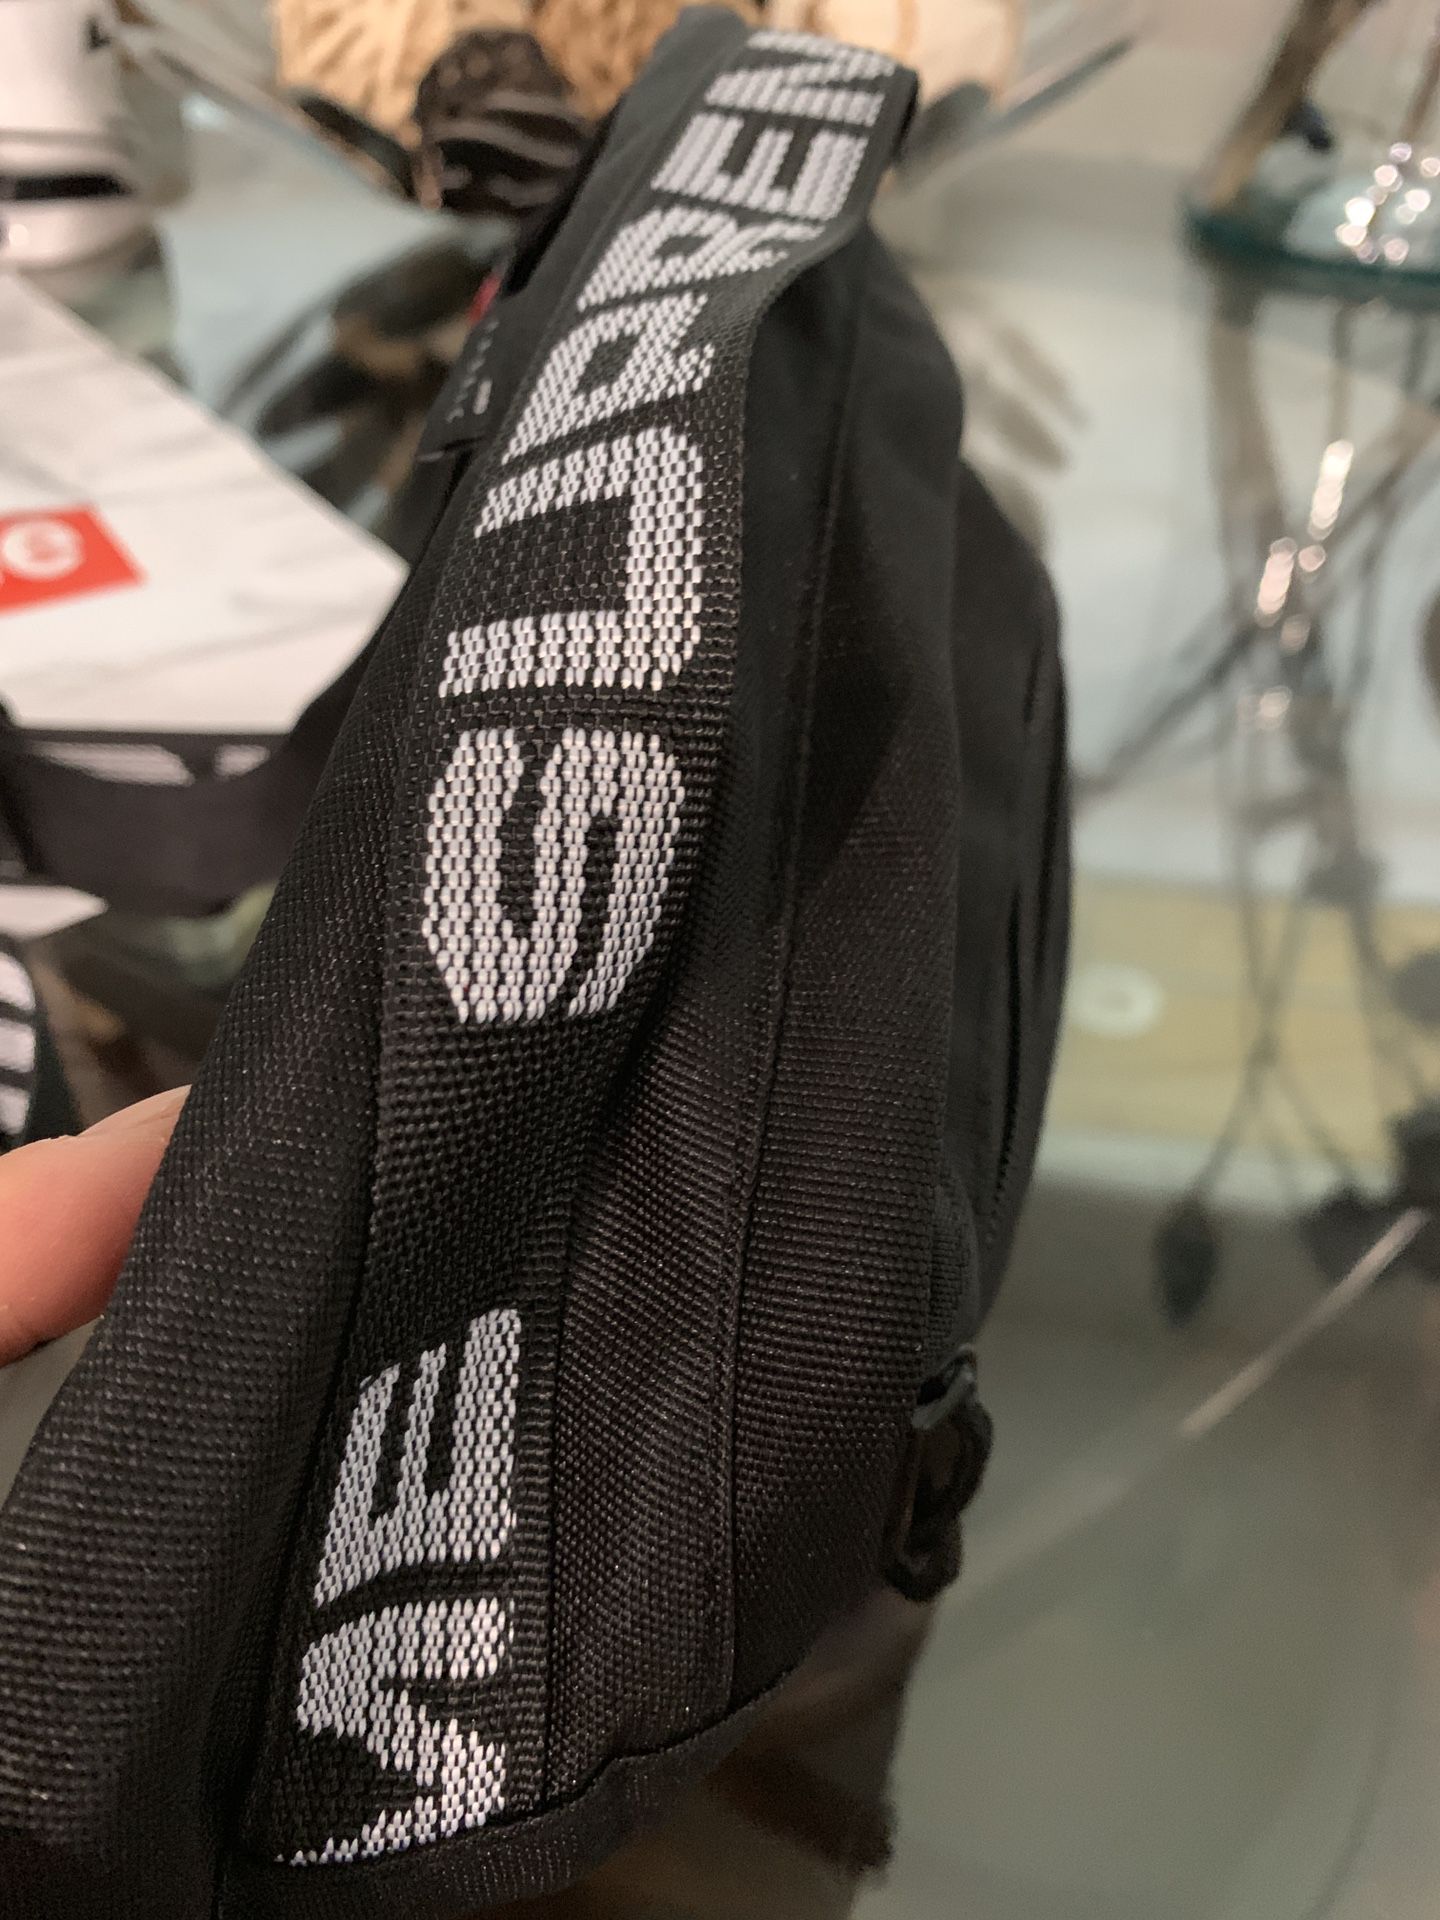 Supreme Waist Bag SS18 for Sale in Castro Valley, CA - OfferUp